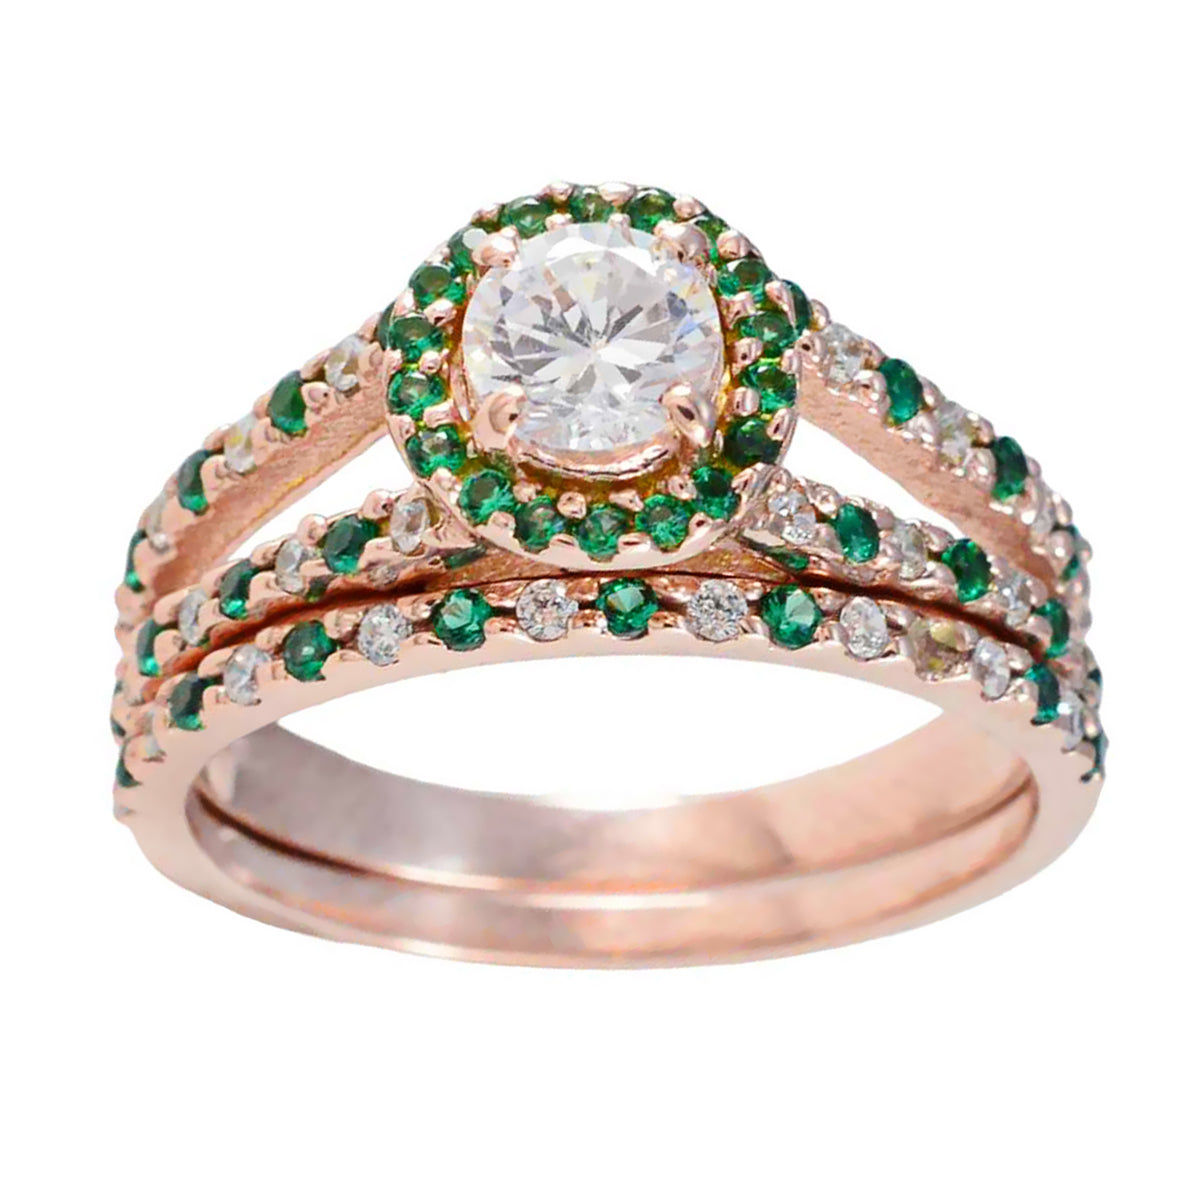 Riyo Extensive Silver Ring With Rose Gold Plating Emerald CZ Stone Round Shape Prong Setting Designer Jewelry Christmas Ring